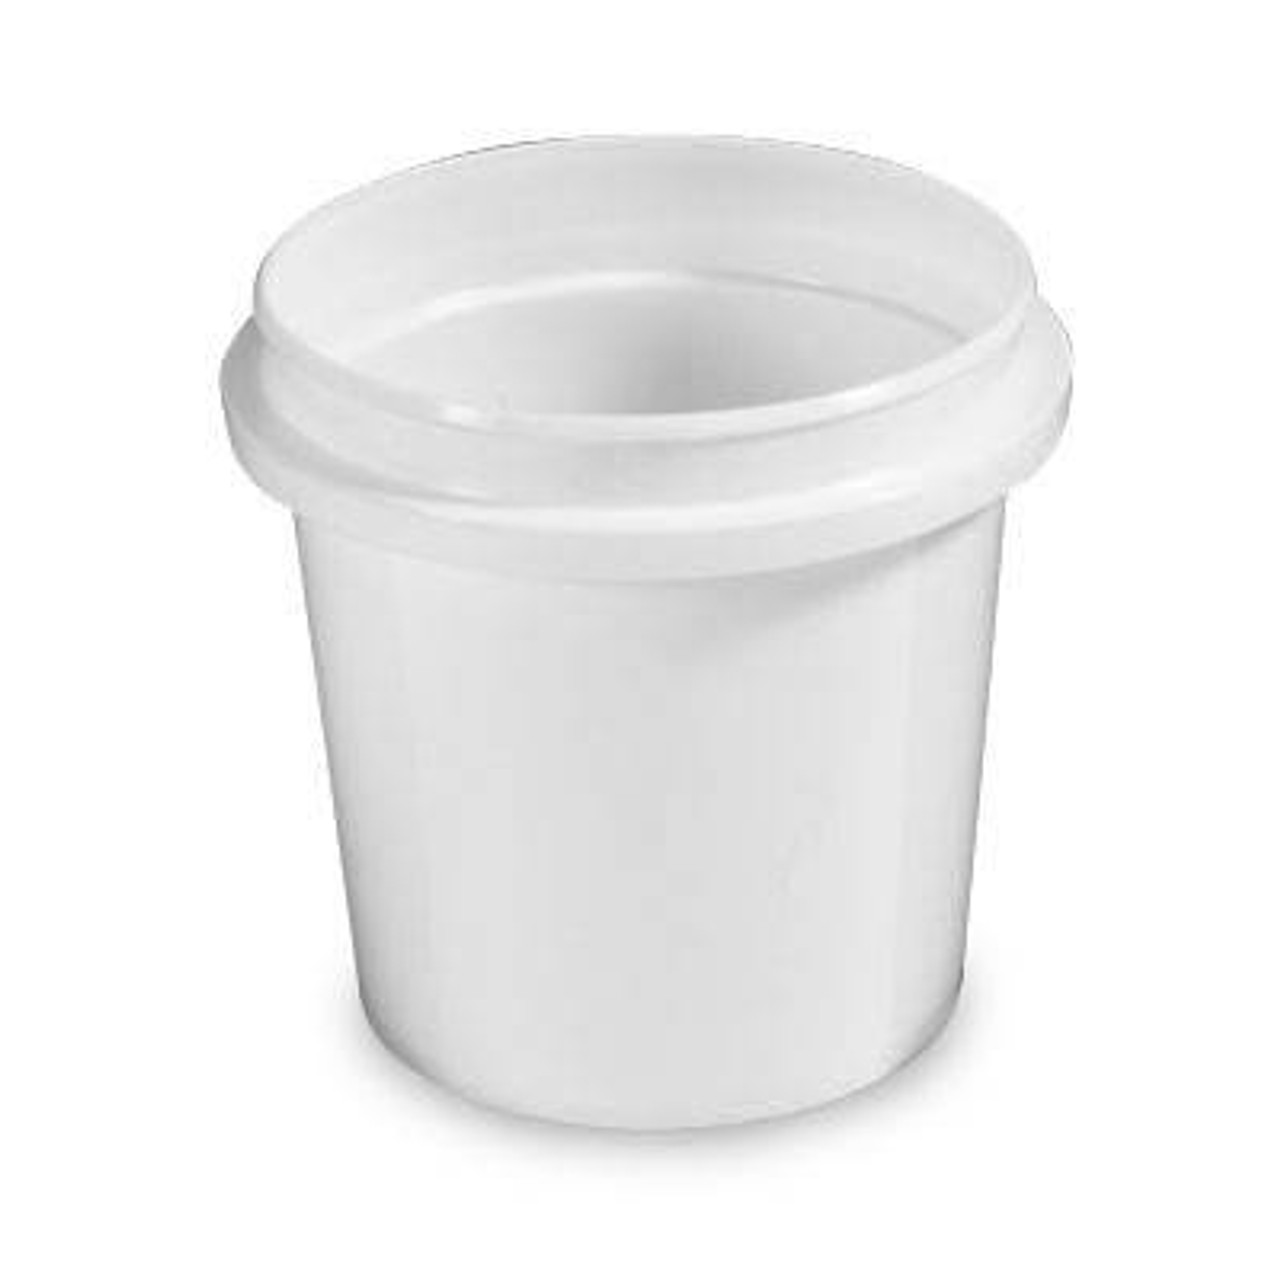 1/4 Gallon (32 oz.) BPA Free Food Grade Round Container with Lid (T41032) -  starting quantity 25 count - FREE SHIPPING